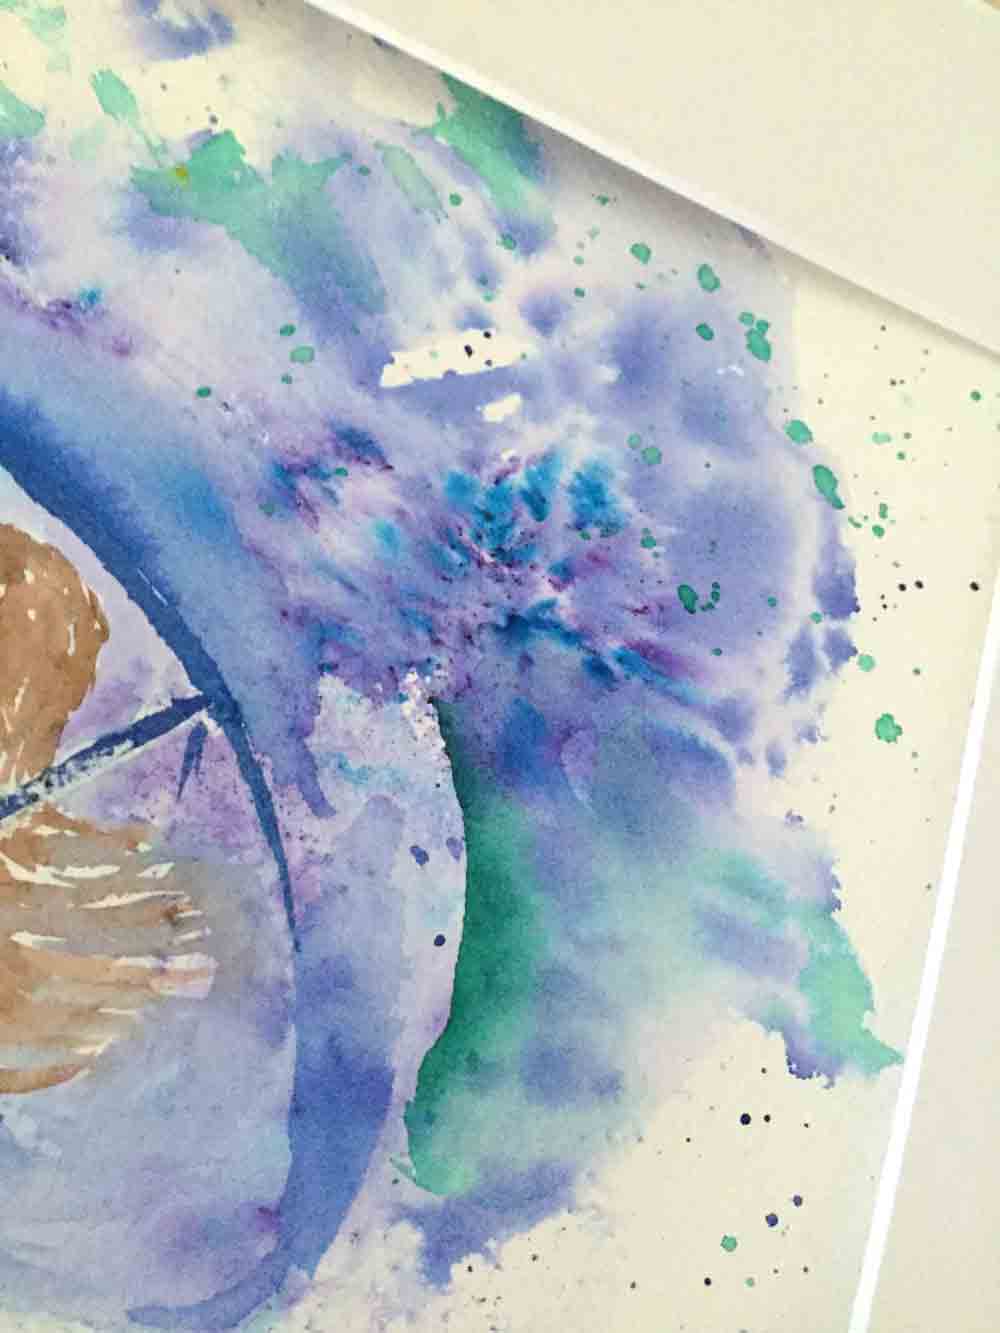 Preserving White in Watercolour (7 Reasons You DON'T Need Masking Fluid) —  Kerrie Woodhouse